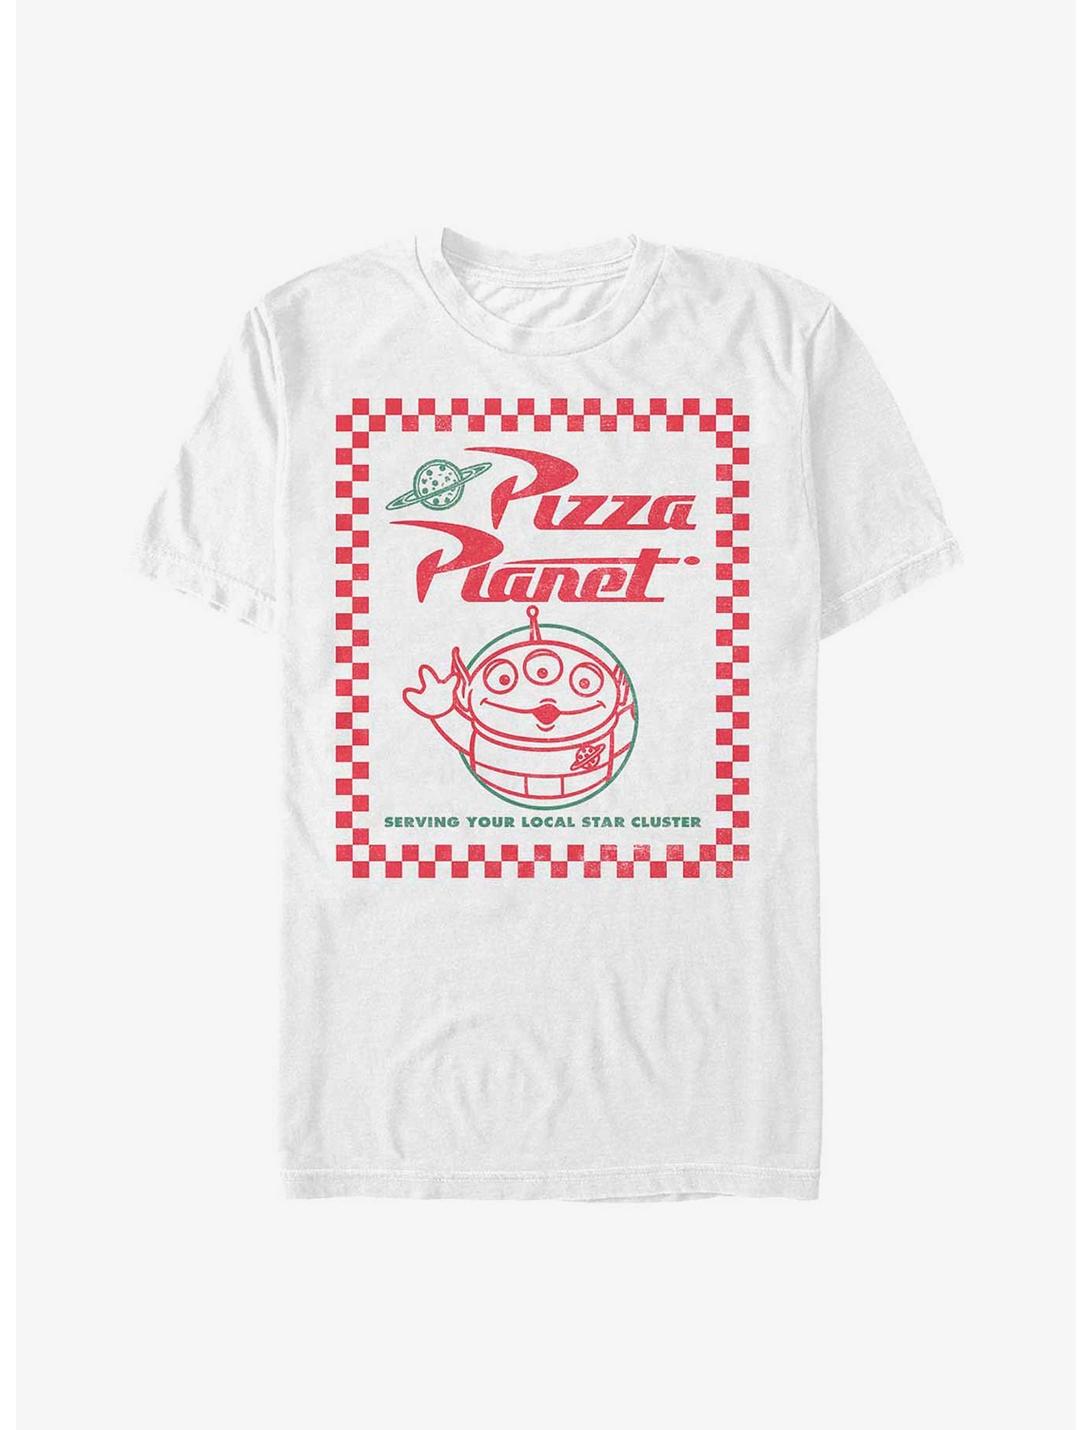 Disney Pixar Toy Story Pizza Planet Space Delivery T-Shirt, WHITE, hi-res